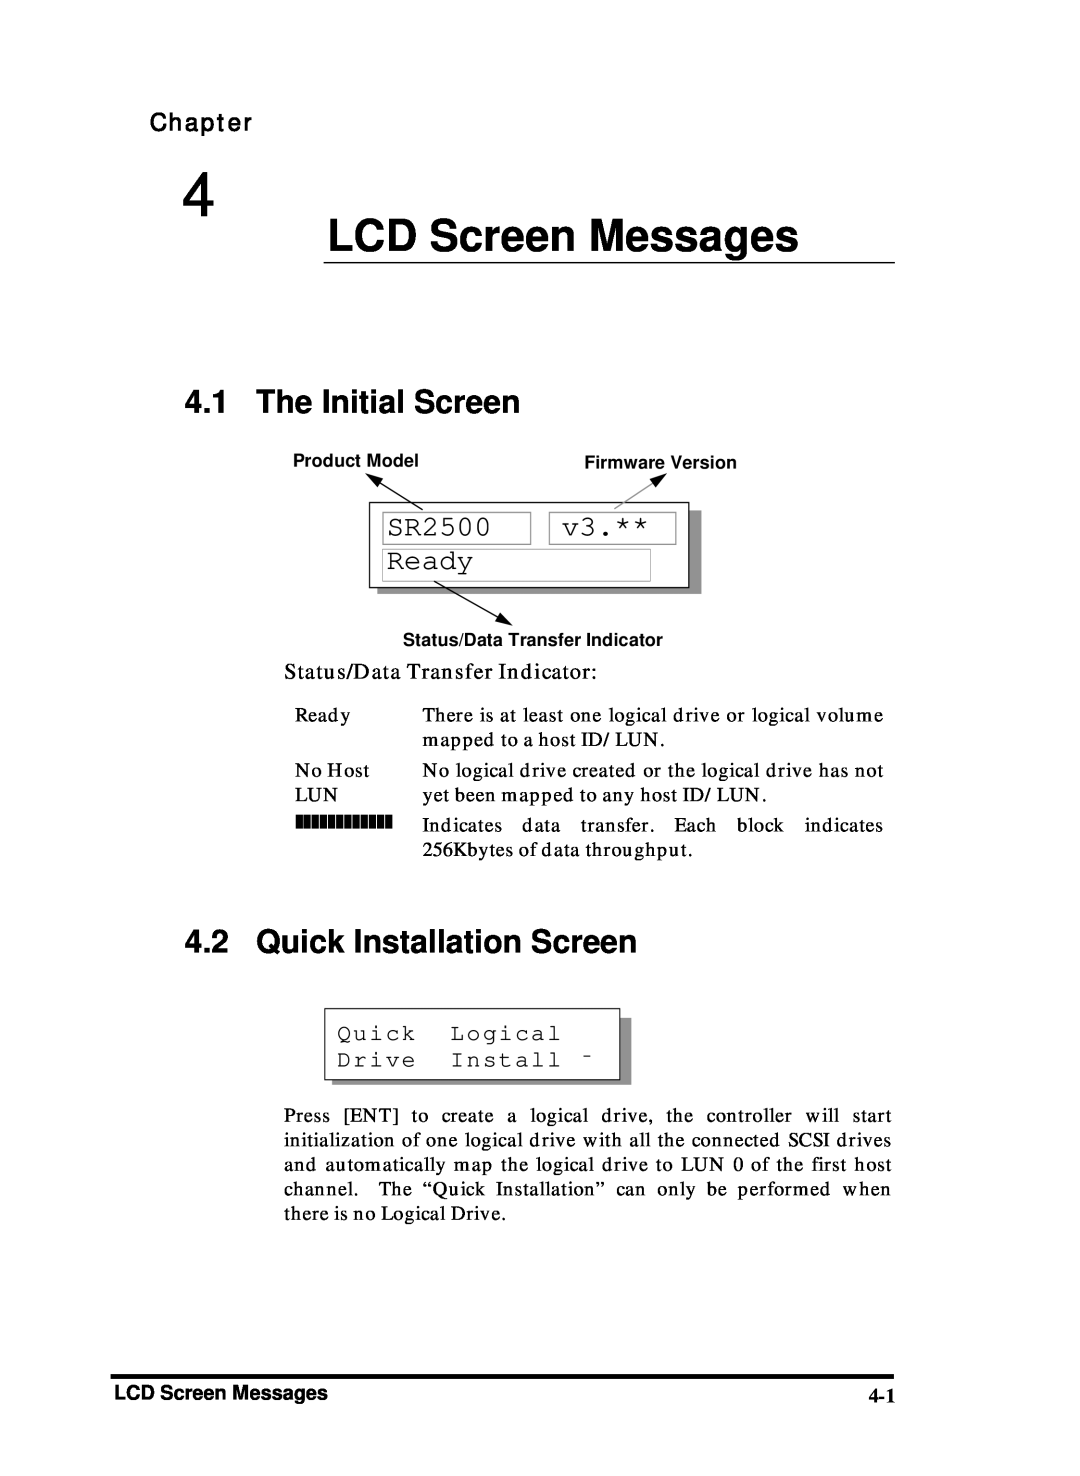 Compaq Infortrend manual LCD Screen Messages, The Initial Screen, Quick Installation Screen, Status/Data Transfer Indicator 